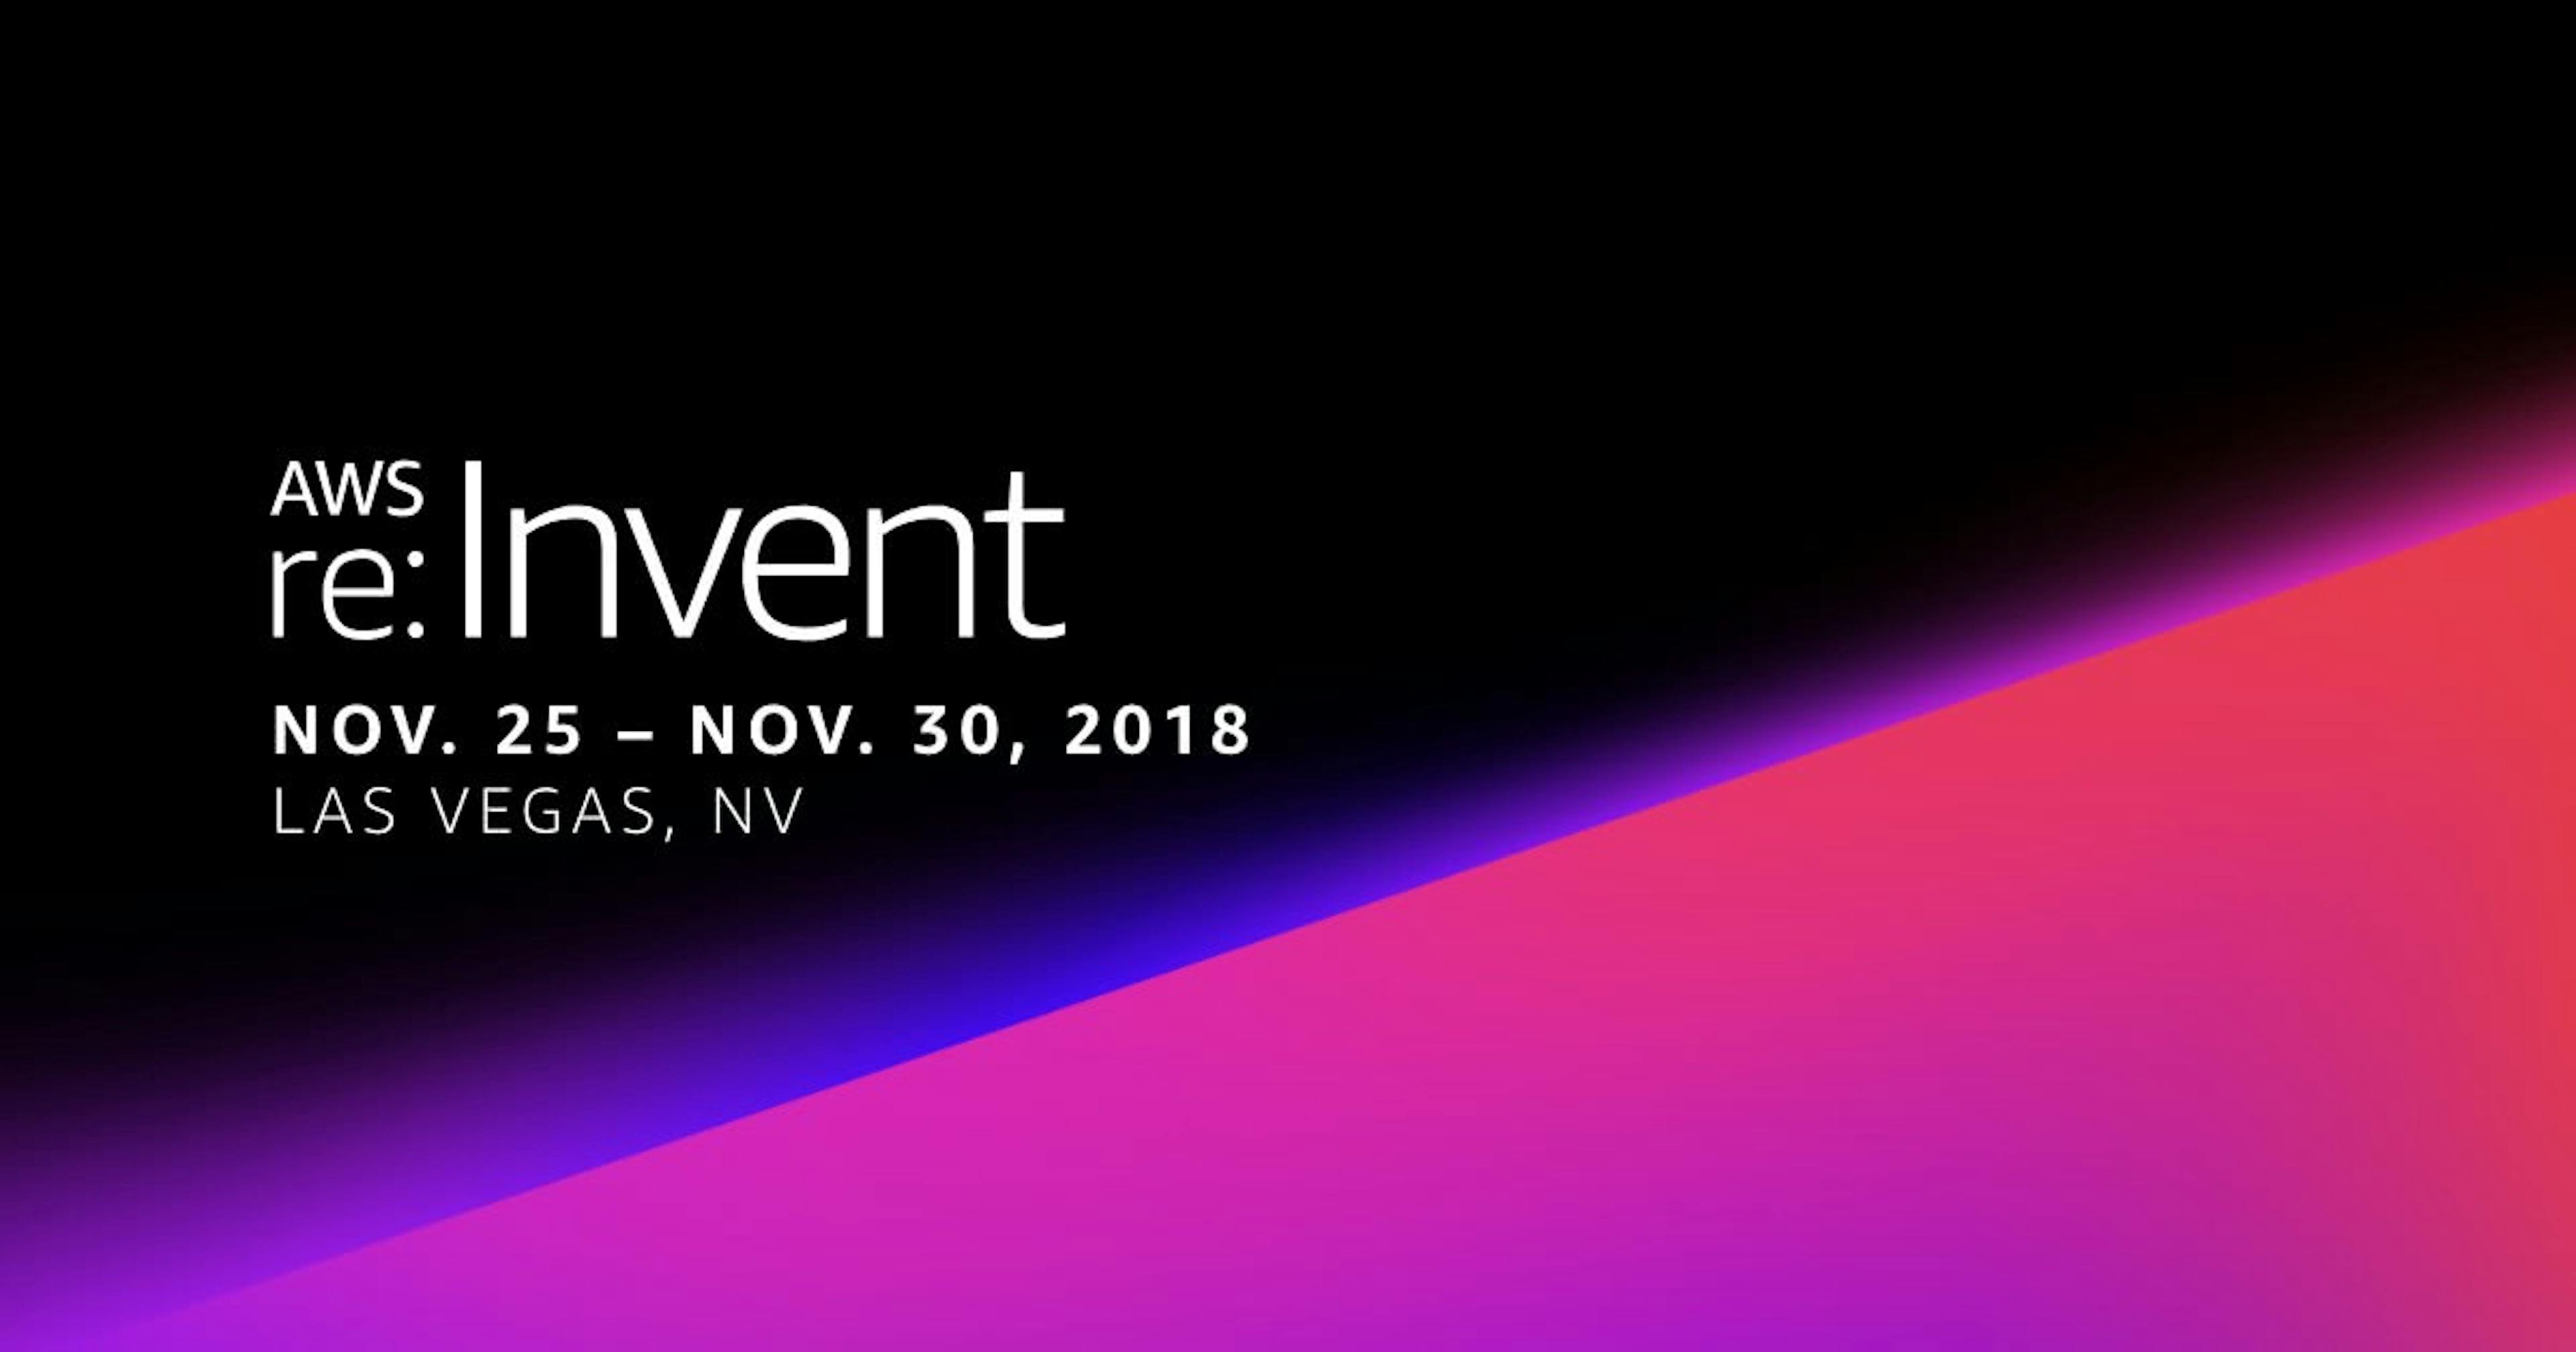 featured image - AWS re:Invent 2018 Recap - The Minority Perspective